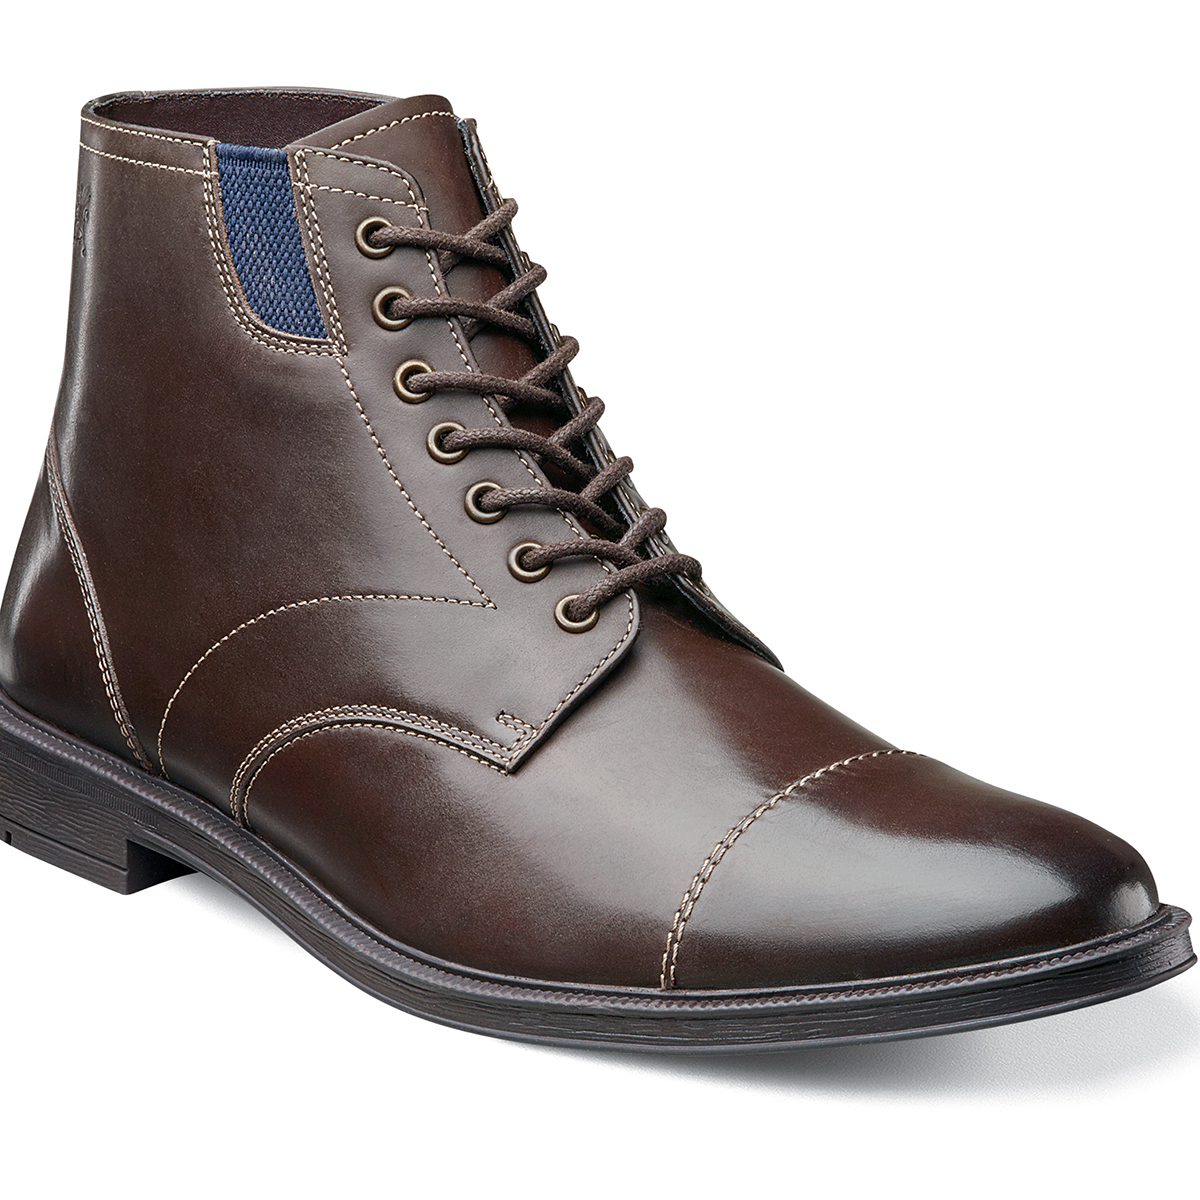 Men's Boots Shoes | Brown Cap Toe Boot | Stacy Adams Dowling